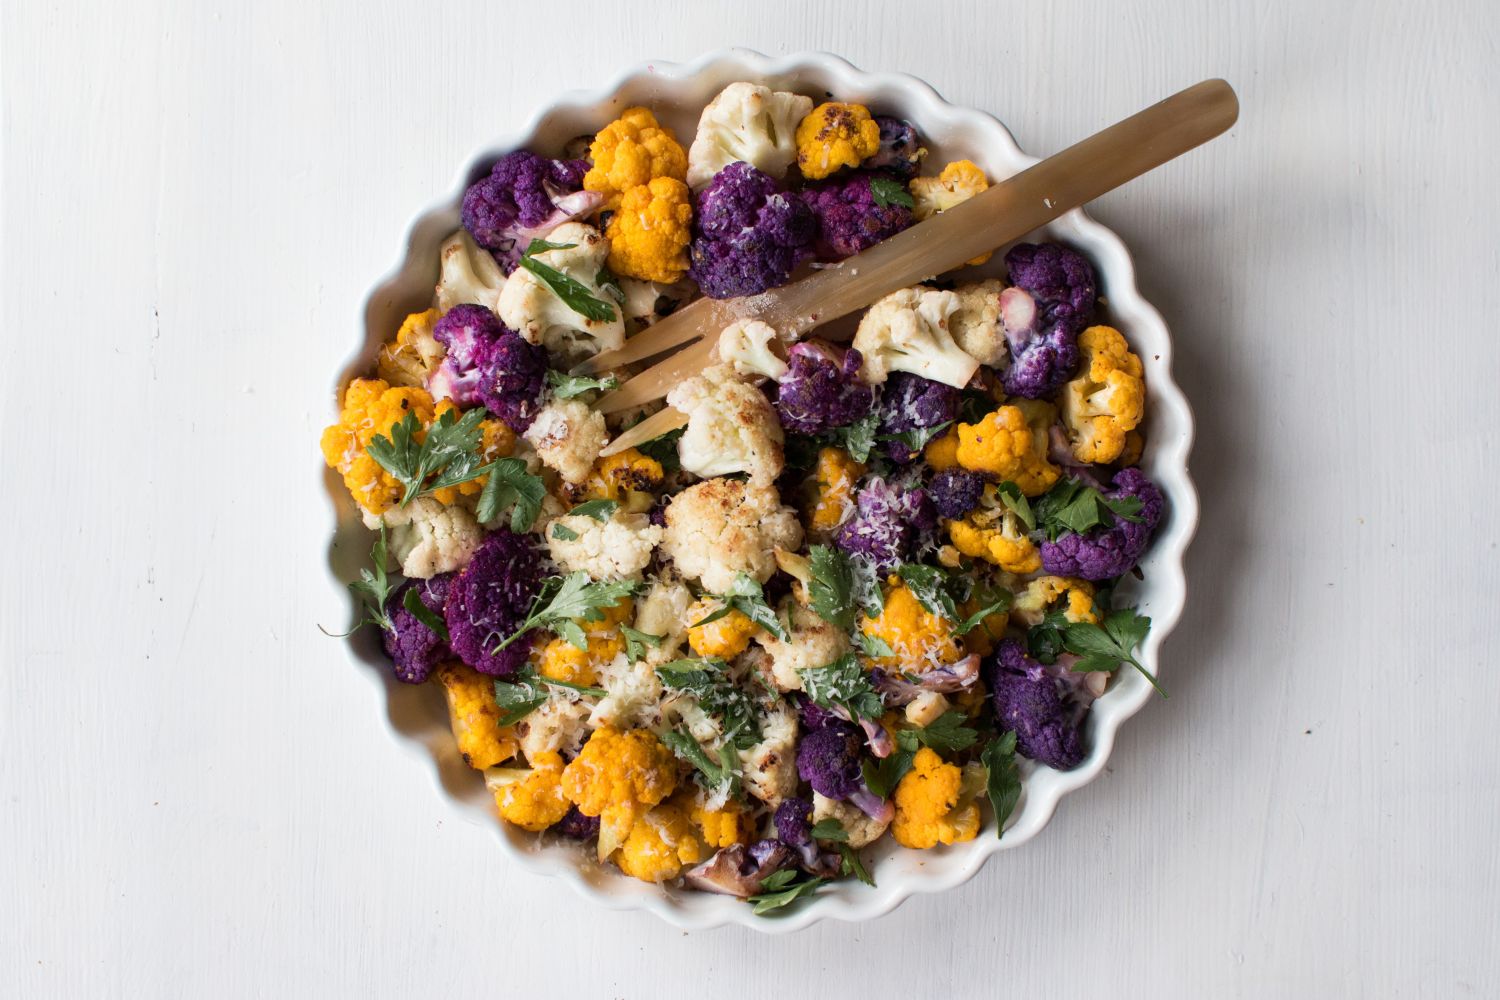 Sauteed cauliflower with white, purple, and golden cauliflower florets with parmesan cheese and parsley.